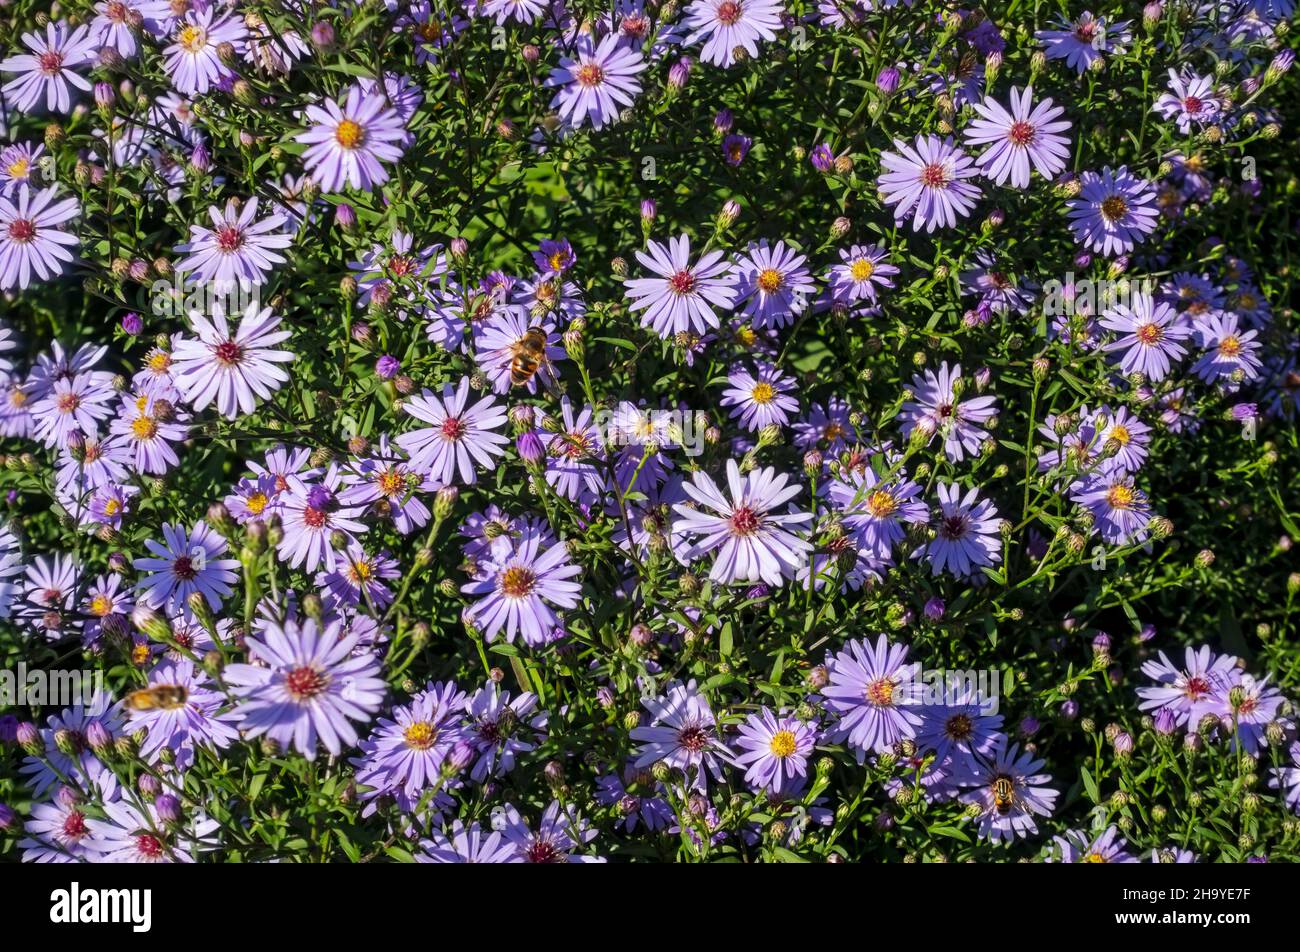 Close up of purple aster flower flowers flowering michaelmas daisy growing in the garden in autumn England UK United Kingdom GB Great Britain Stock Photo